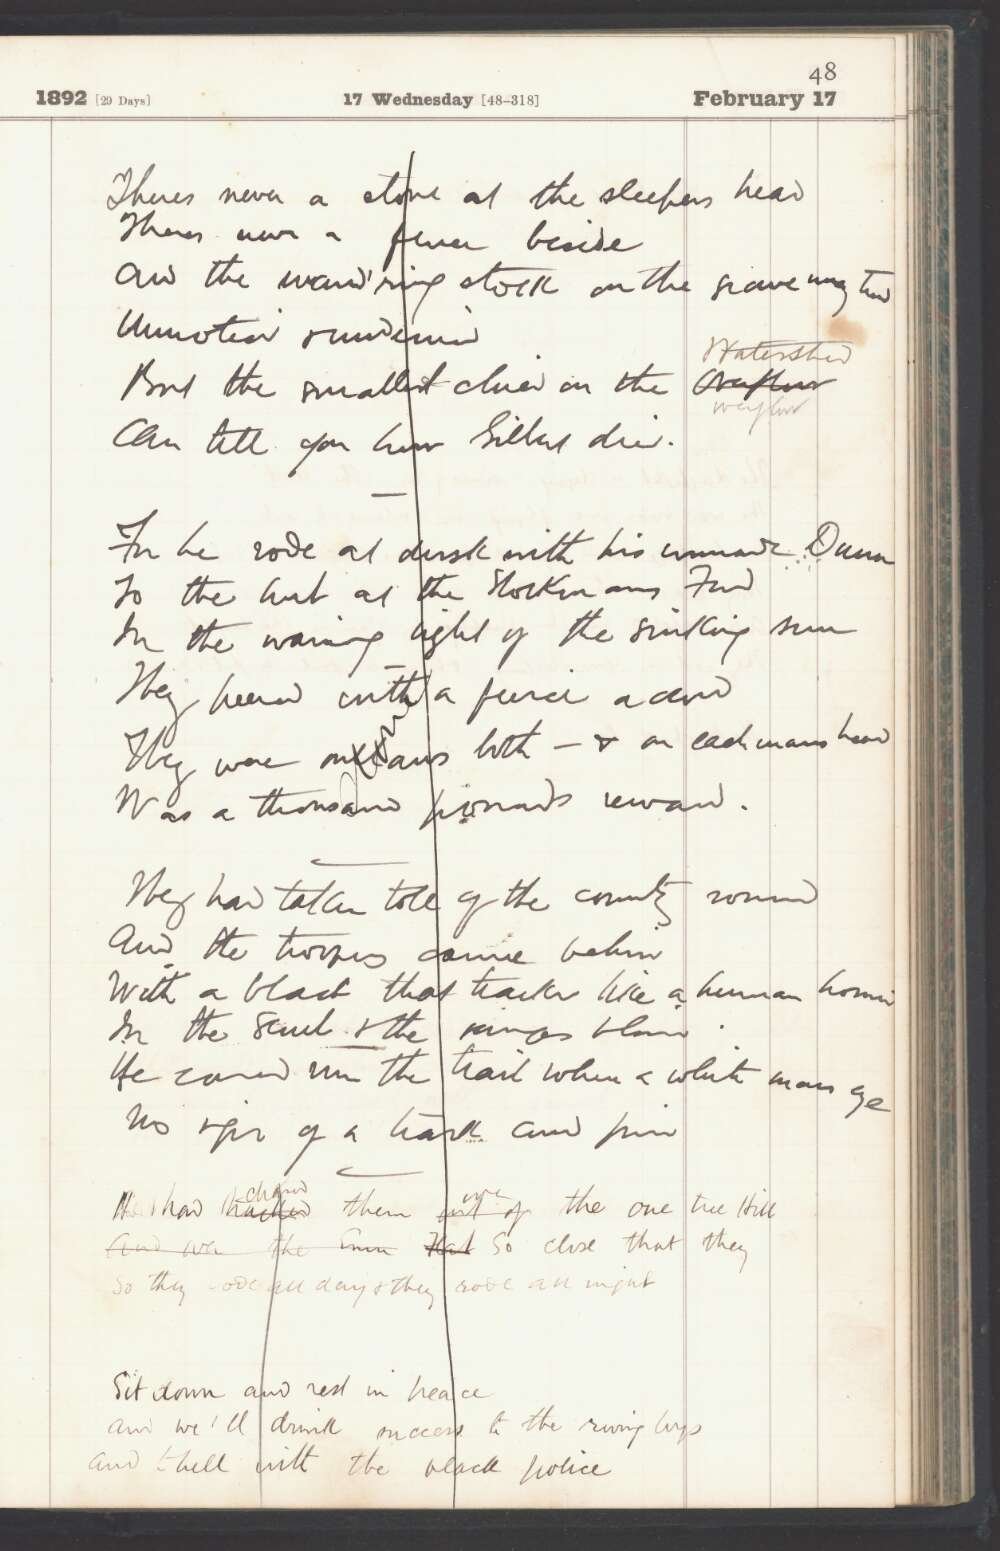 A snapshot of a handwritten diary entry on February 17, 1892